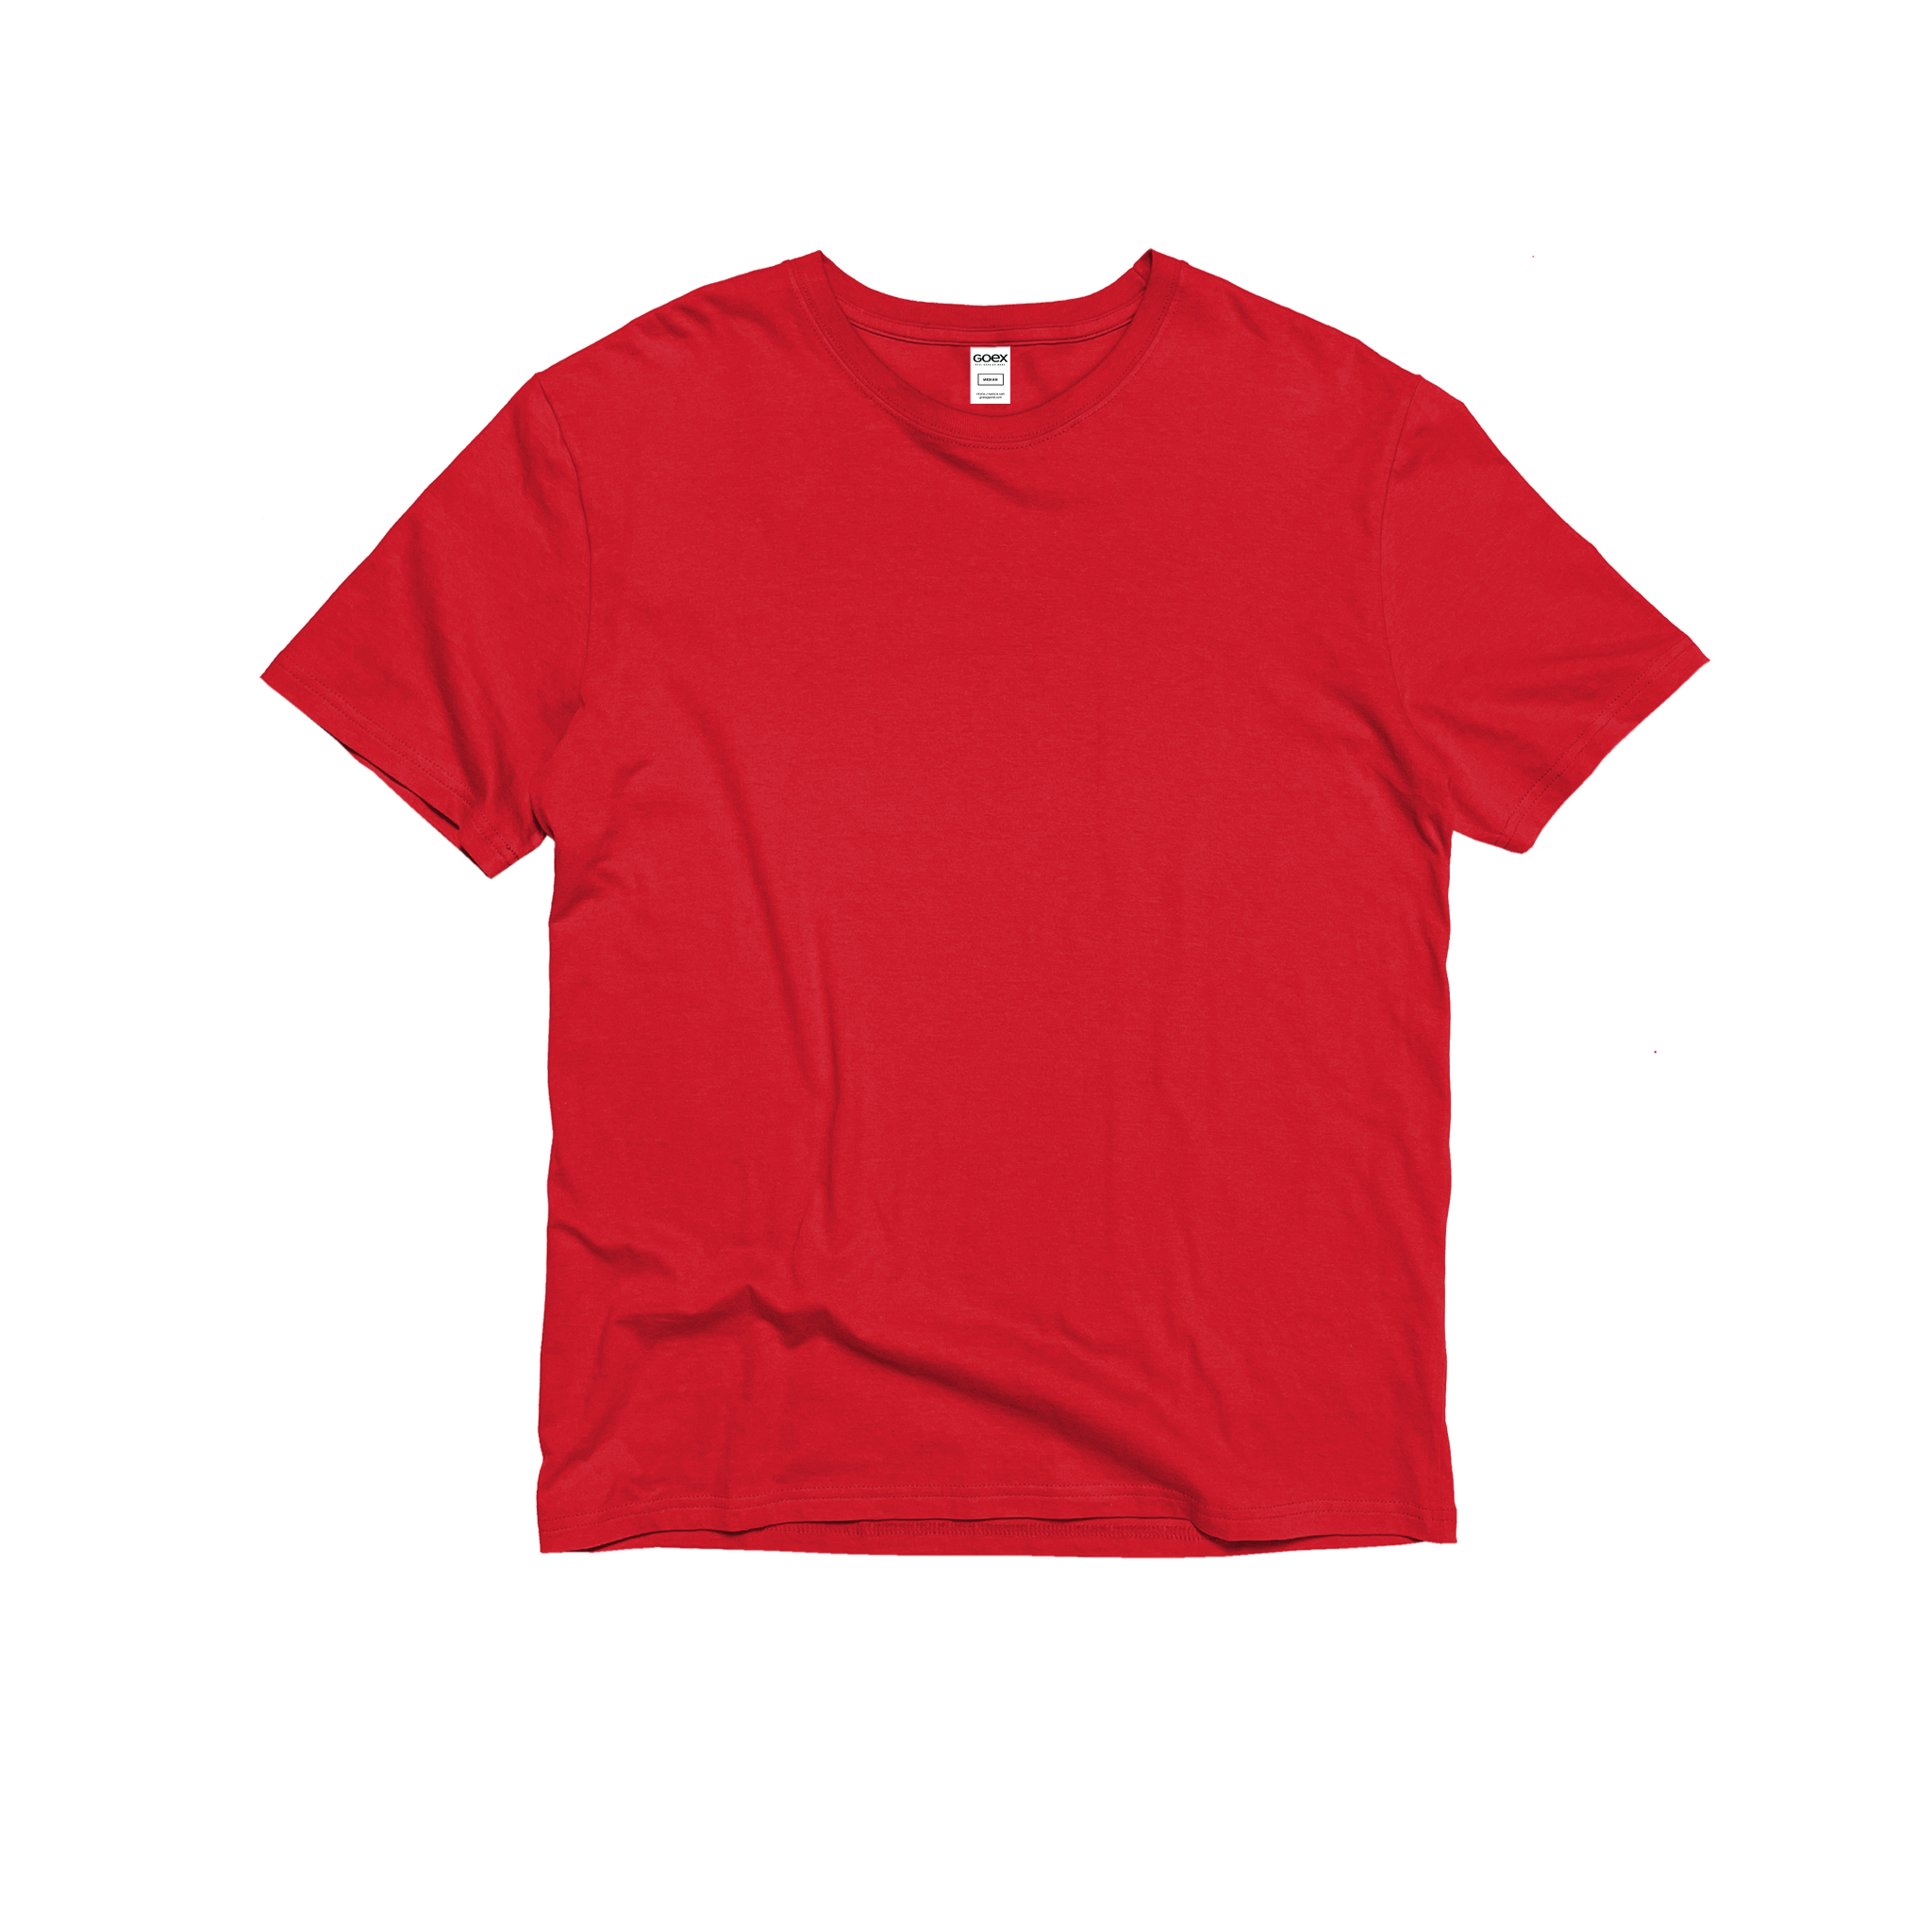 Front Flat Lay of GOEX Unisex and Men's Cotton Tee in Red